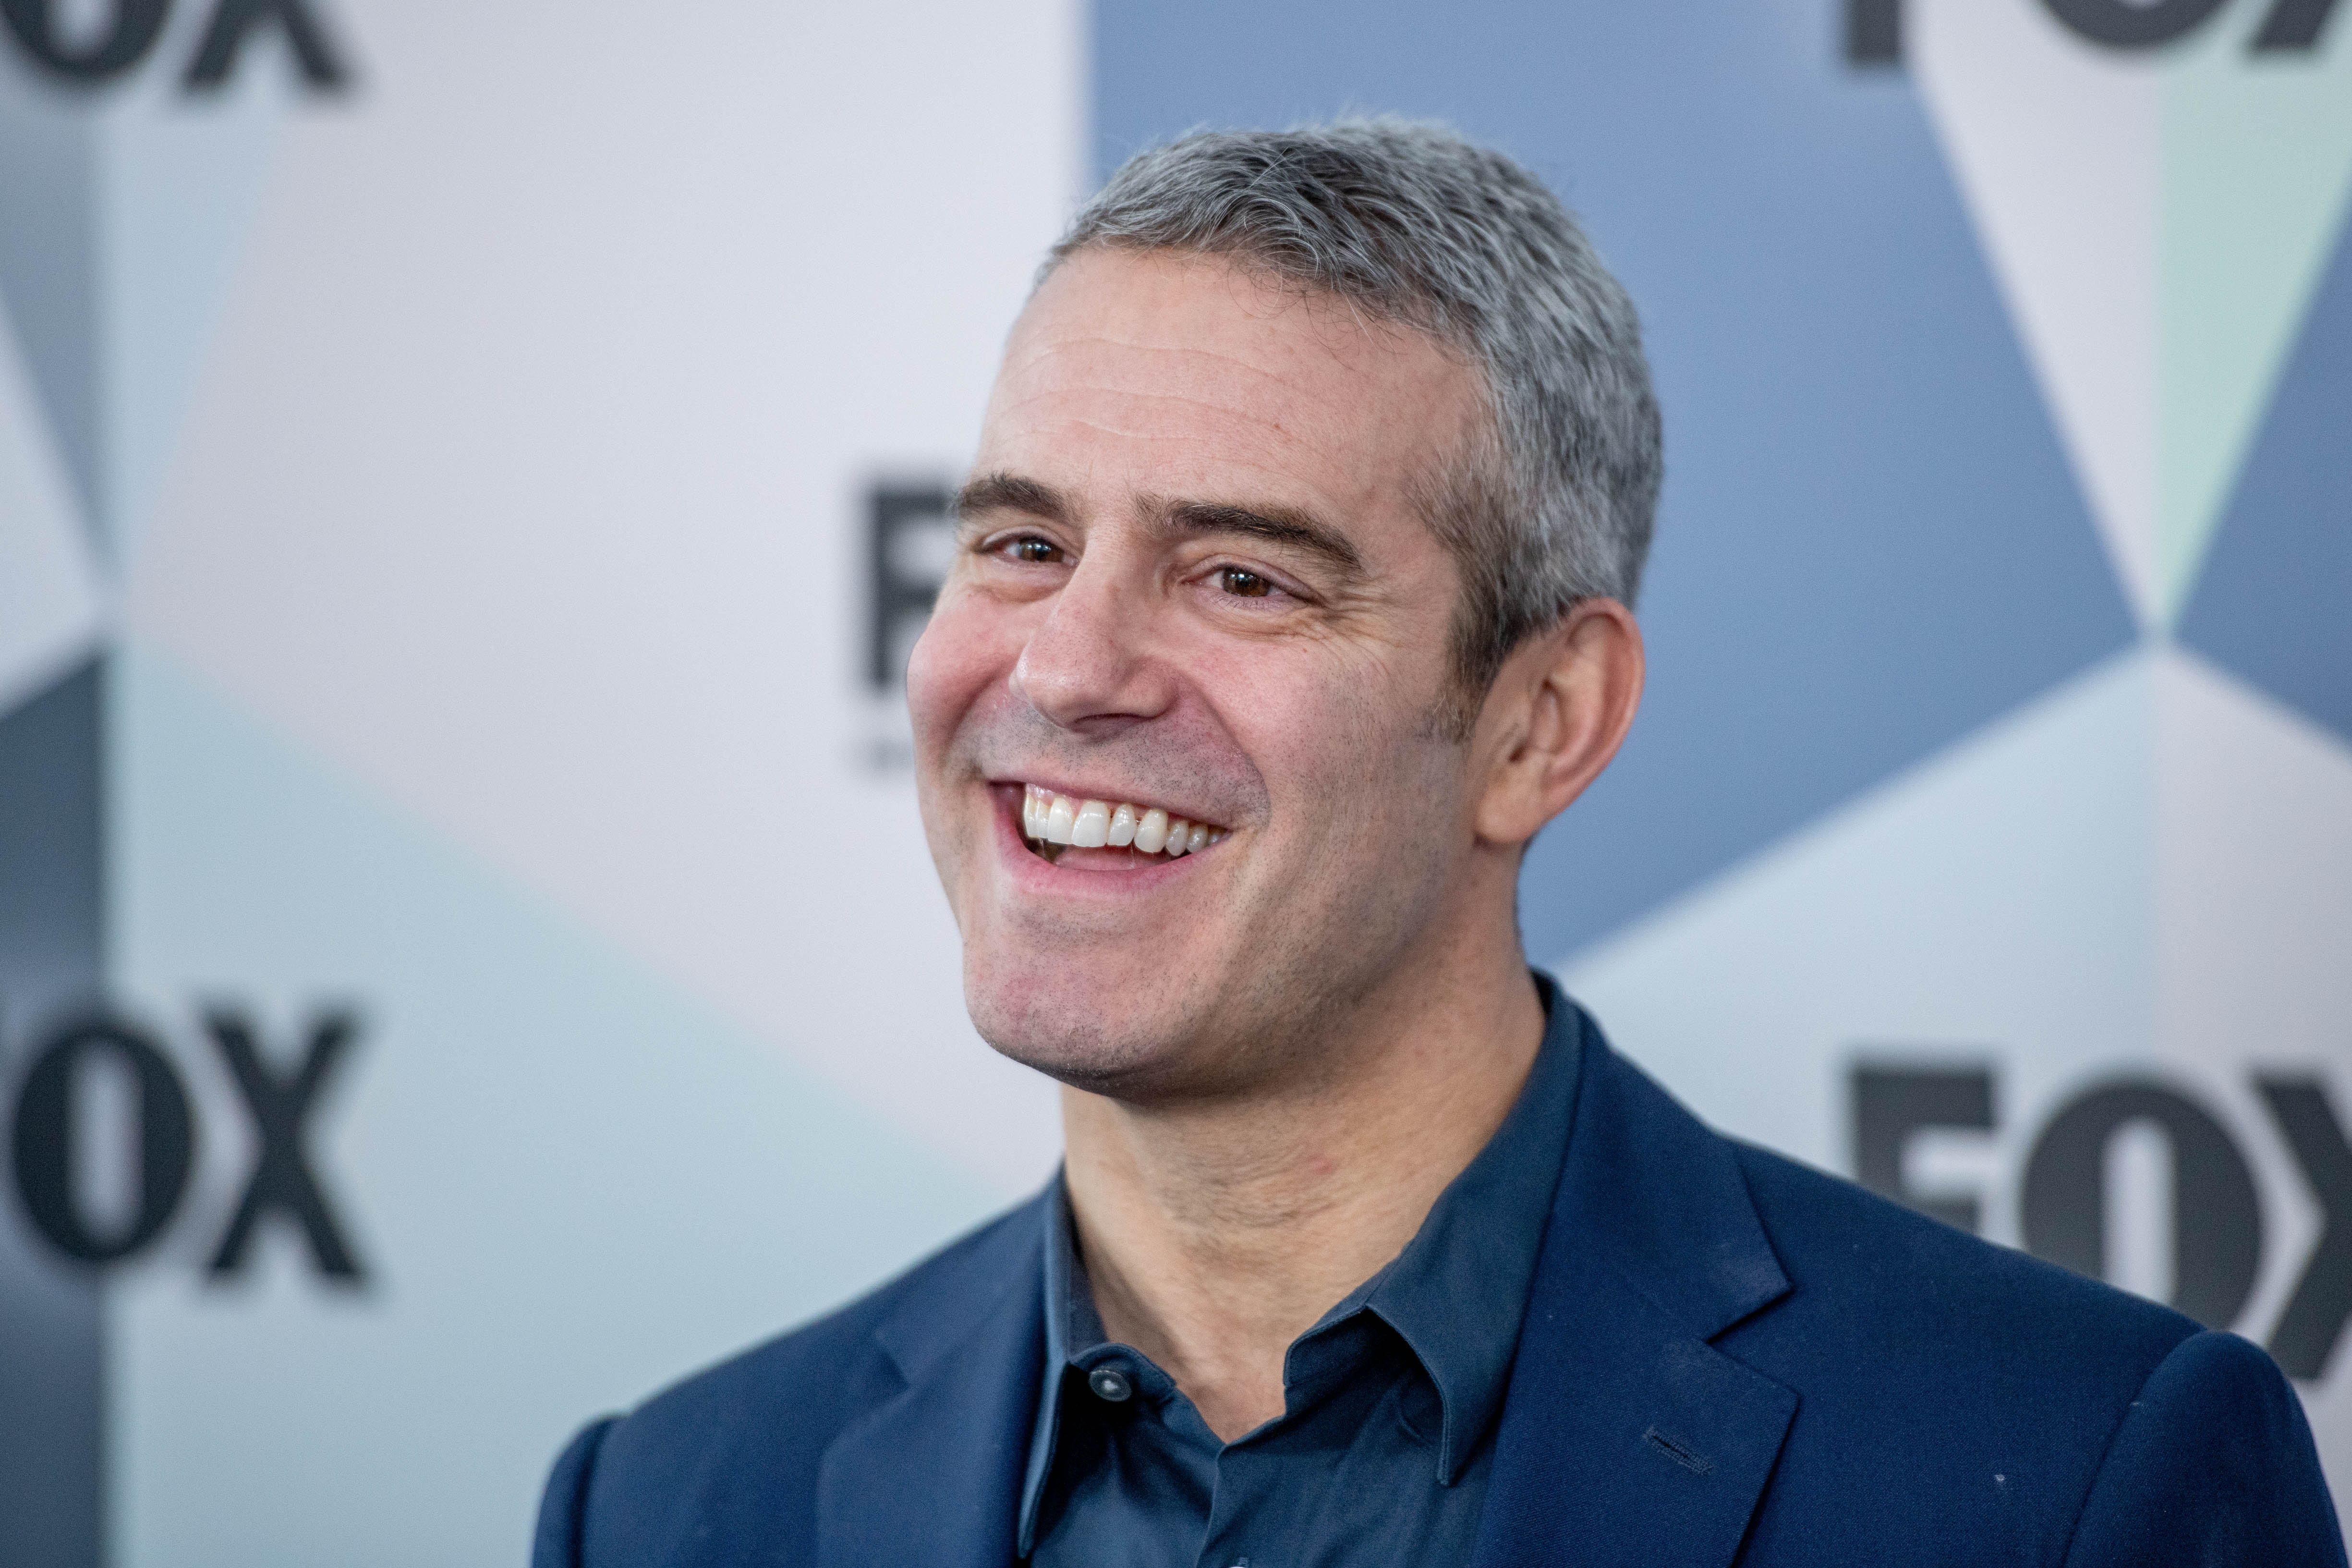 Andy Cohen attends the 2018 Fox Network Upfront at Wollman Rink, Central Park on May 14, 2018. | Photo: GettyImages